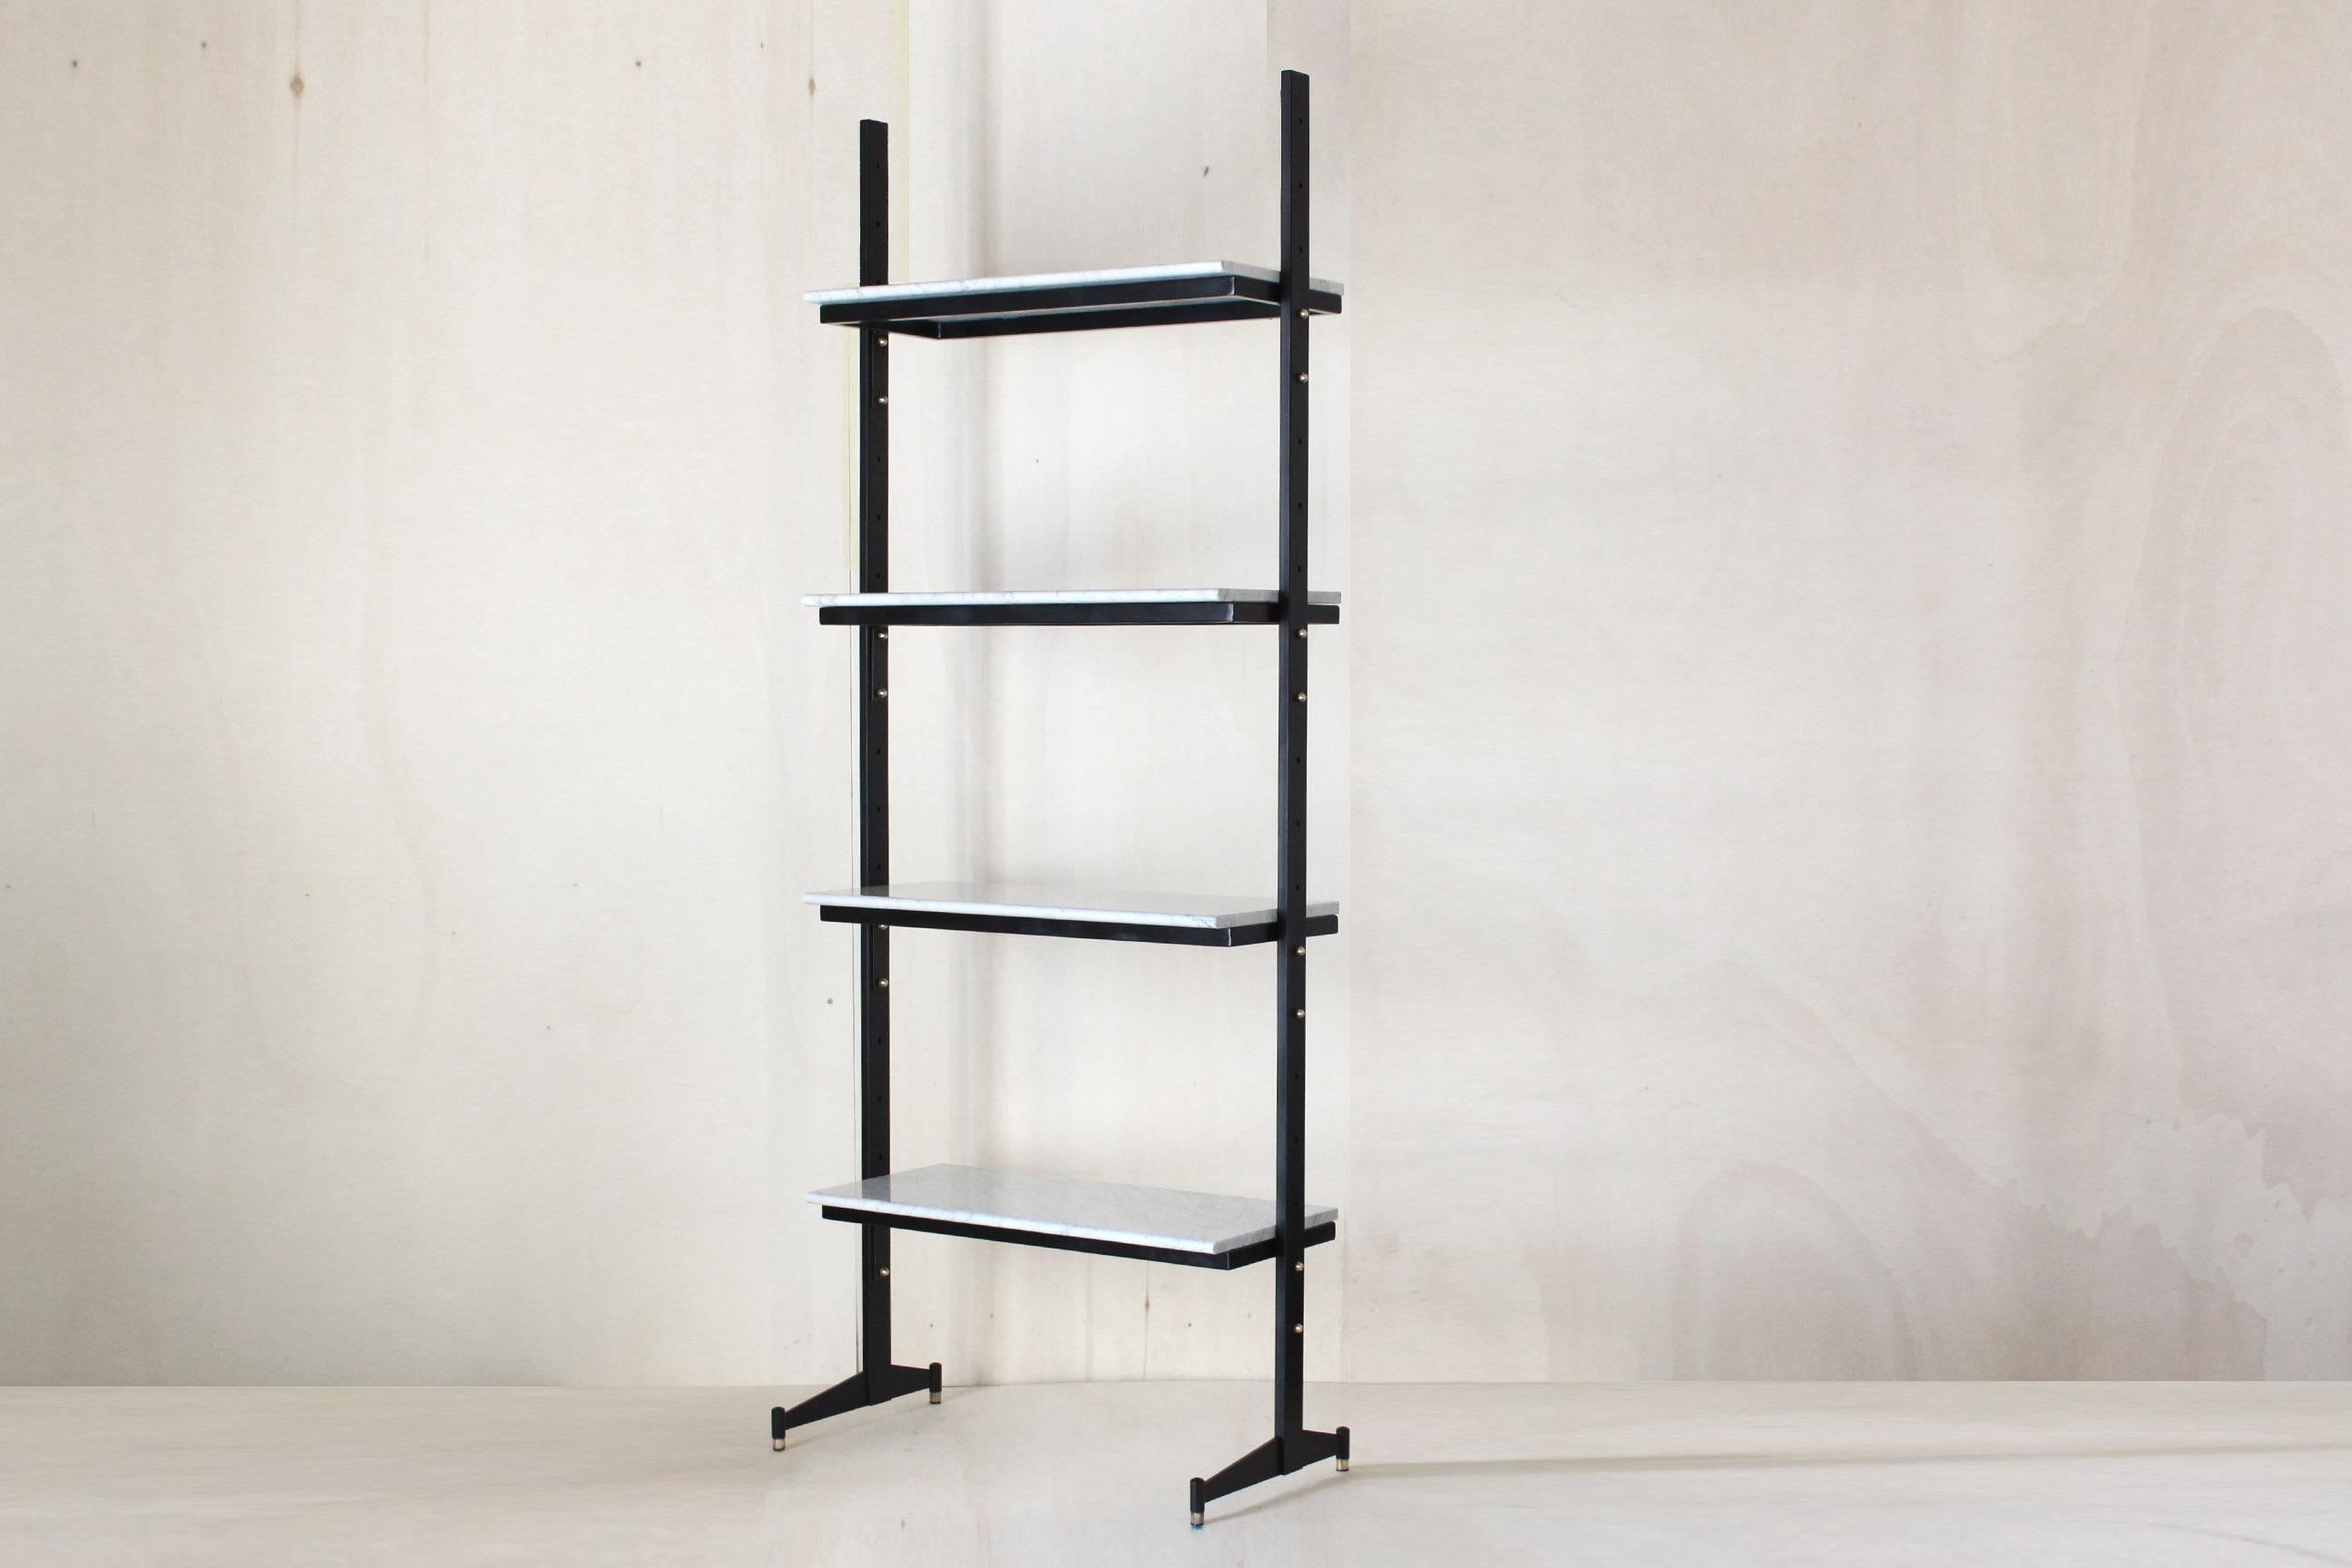 Vintage bookshelf with Carrara Marble shelves, Italy 1960s. 
A rare 1960s Mid-Century Modern style book shelf with Carrara marble shelves and black iron structure. 

The item is in perfect conditions as the Carrara marble has been cleaned, polished